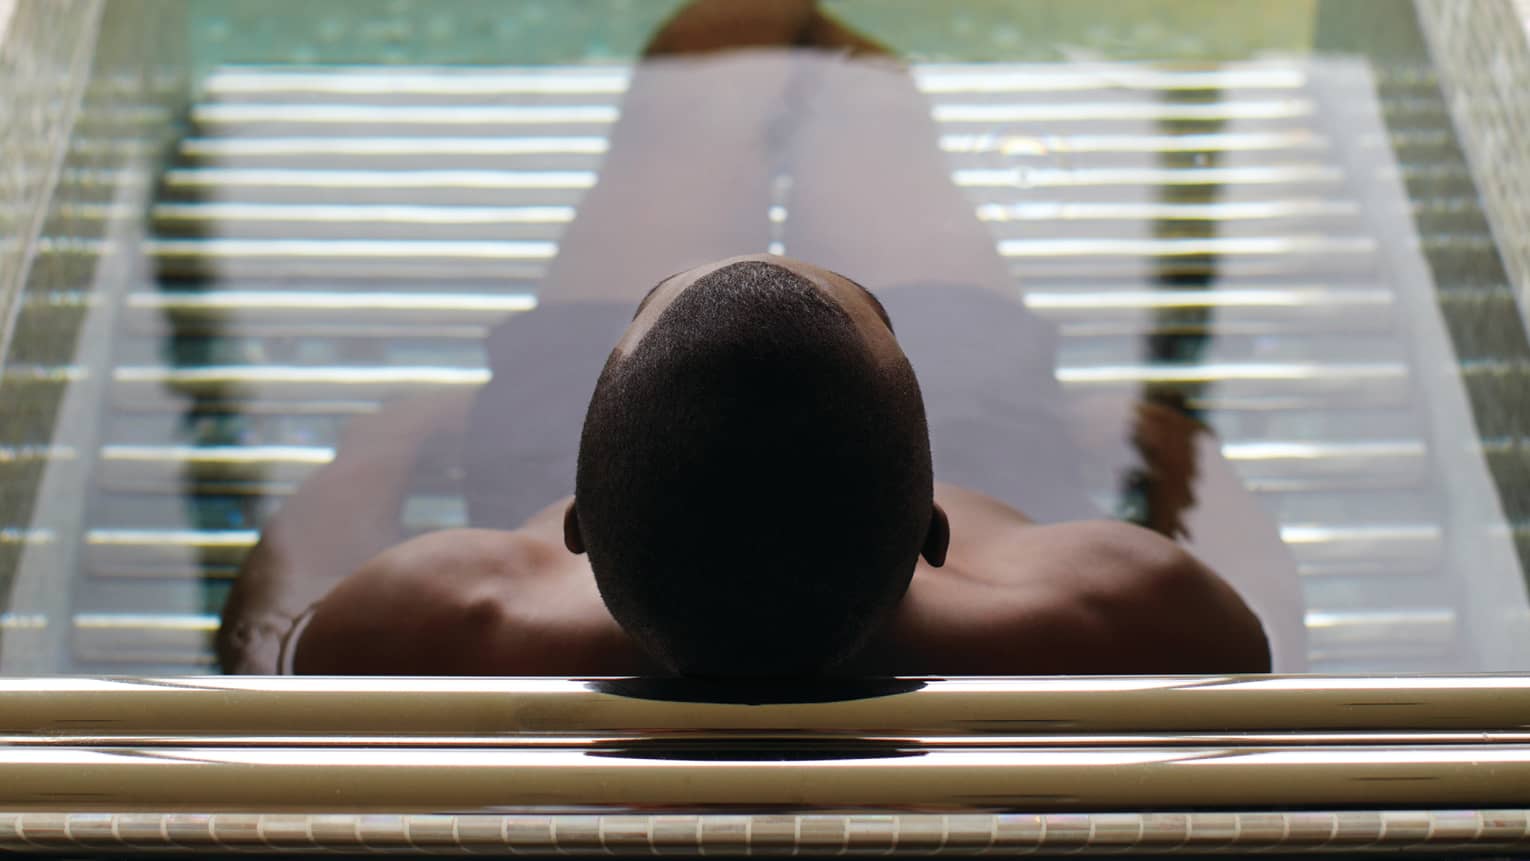 Silhouette of back of man's head, legs in spa tub